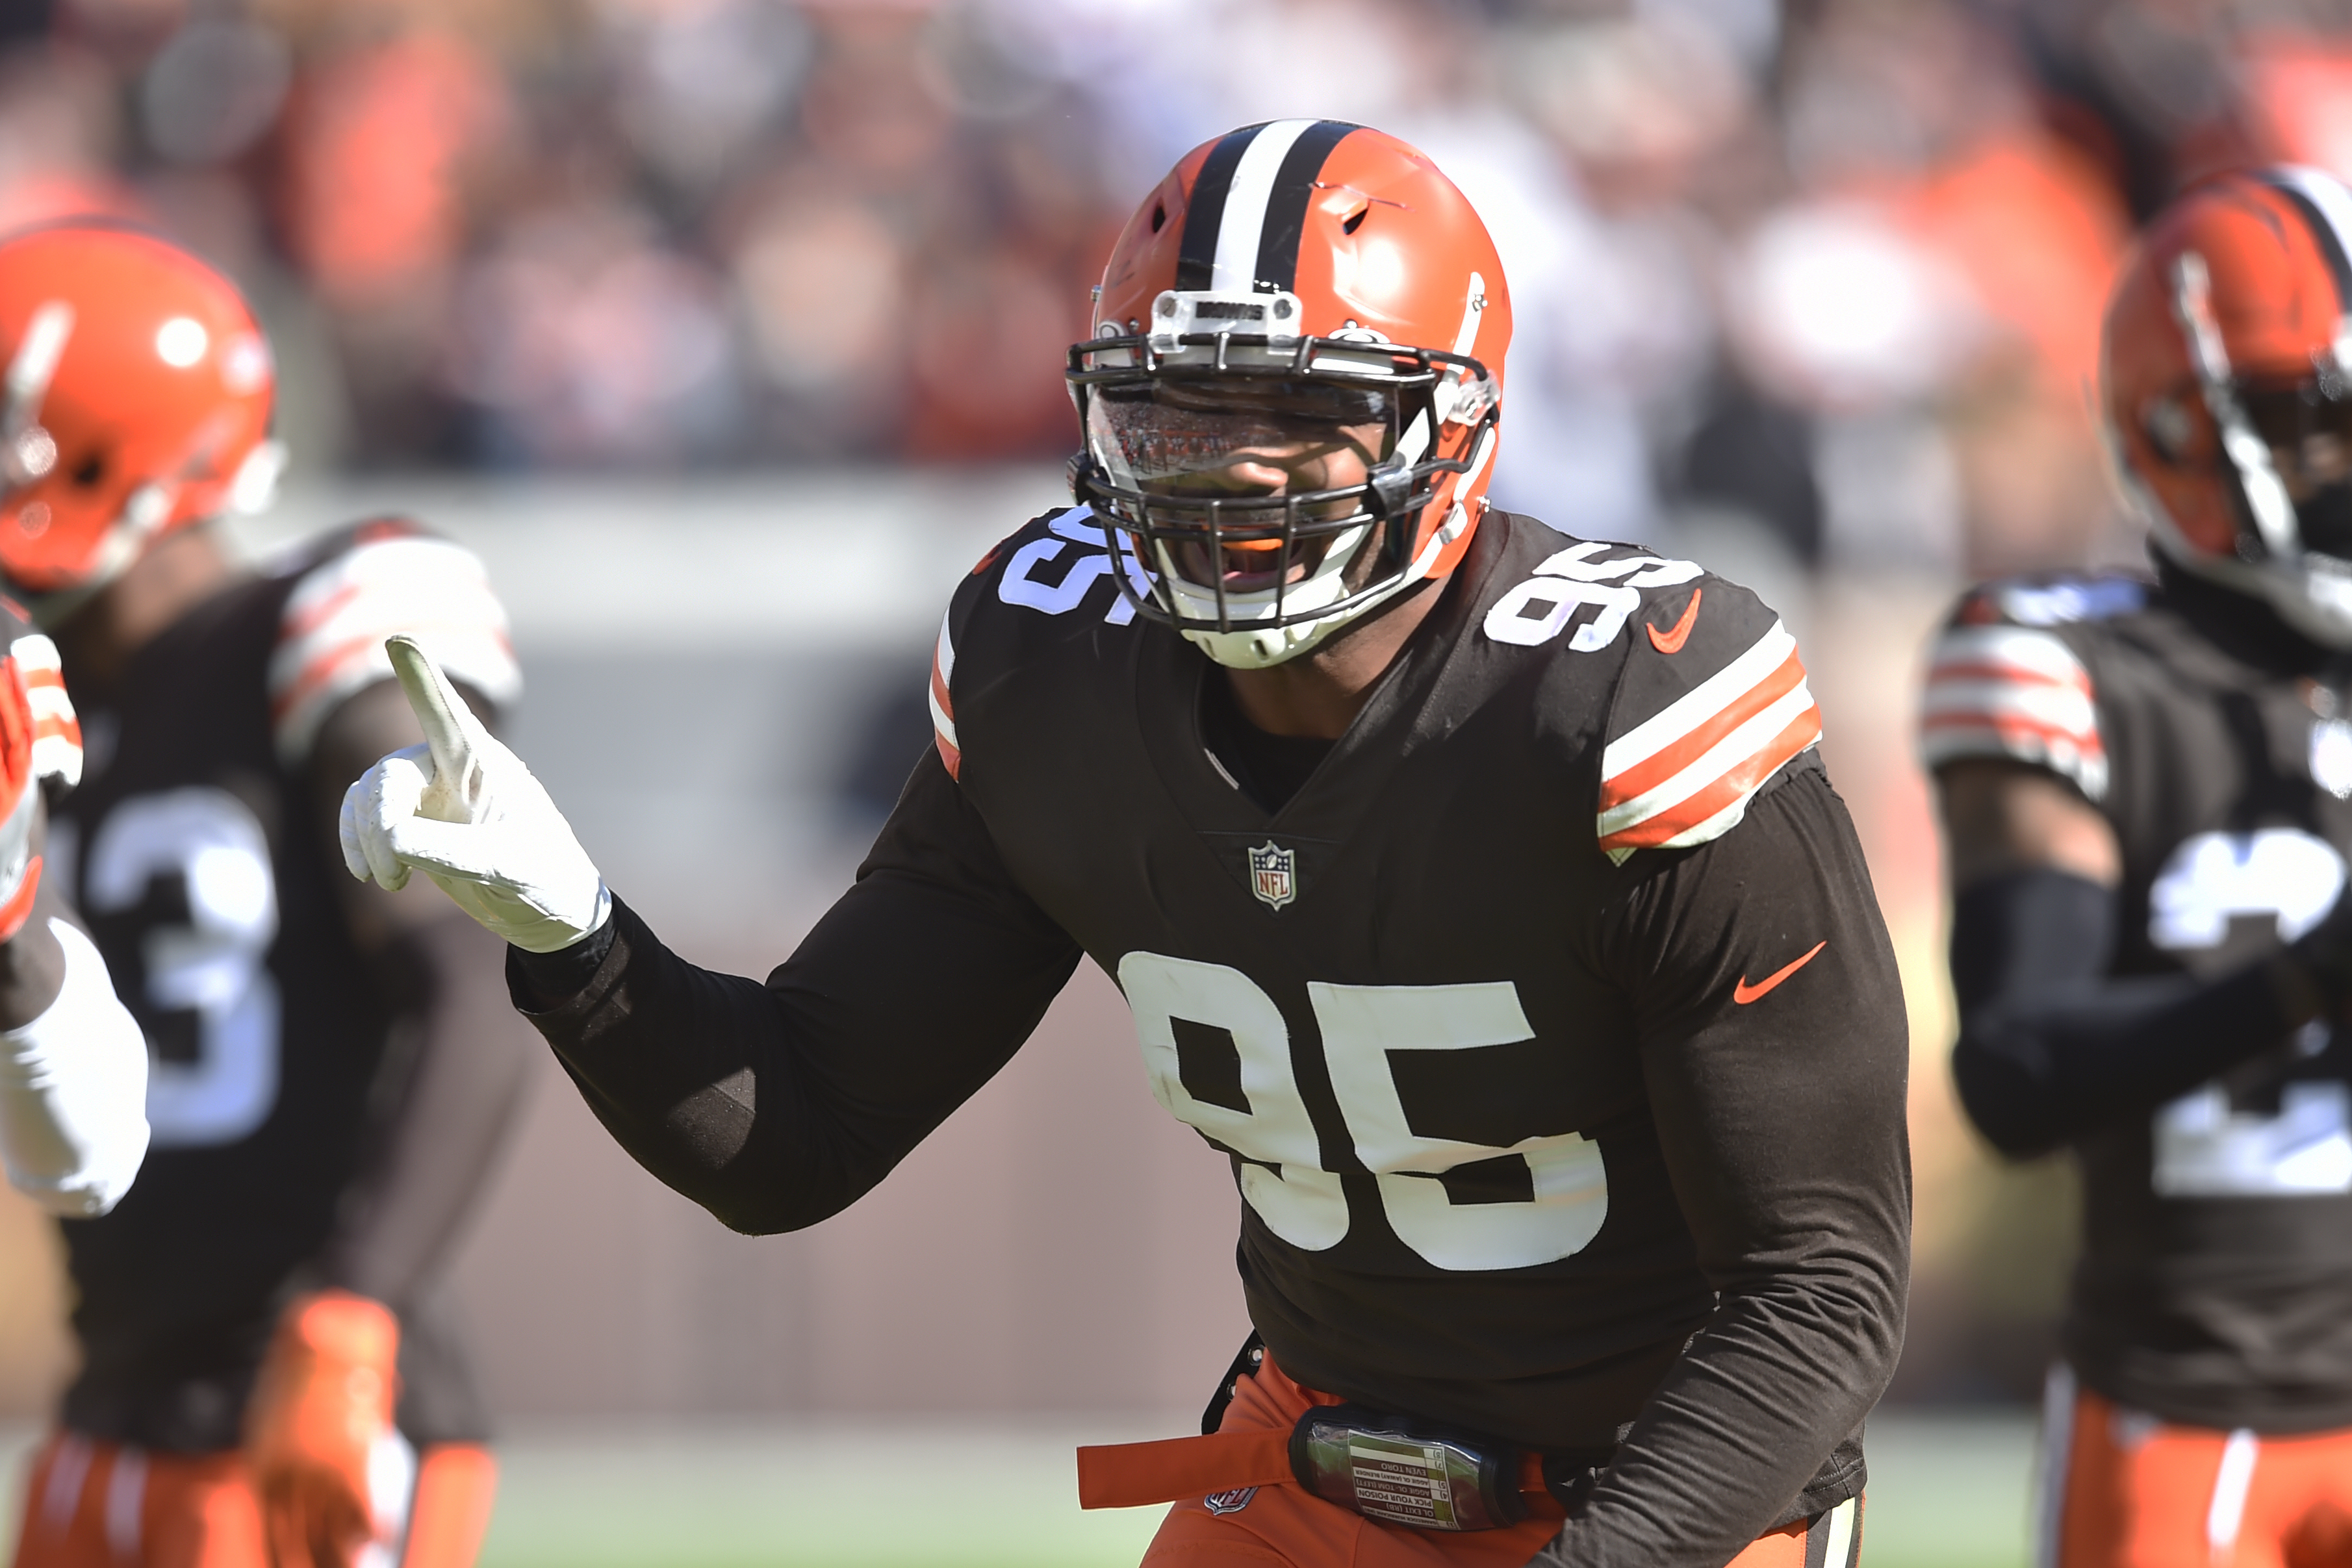 Browns Myles Garrett on Availability for Next Game: I'll Be Ready